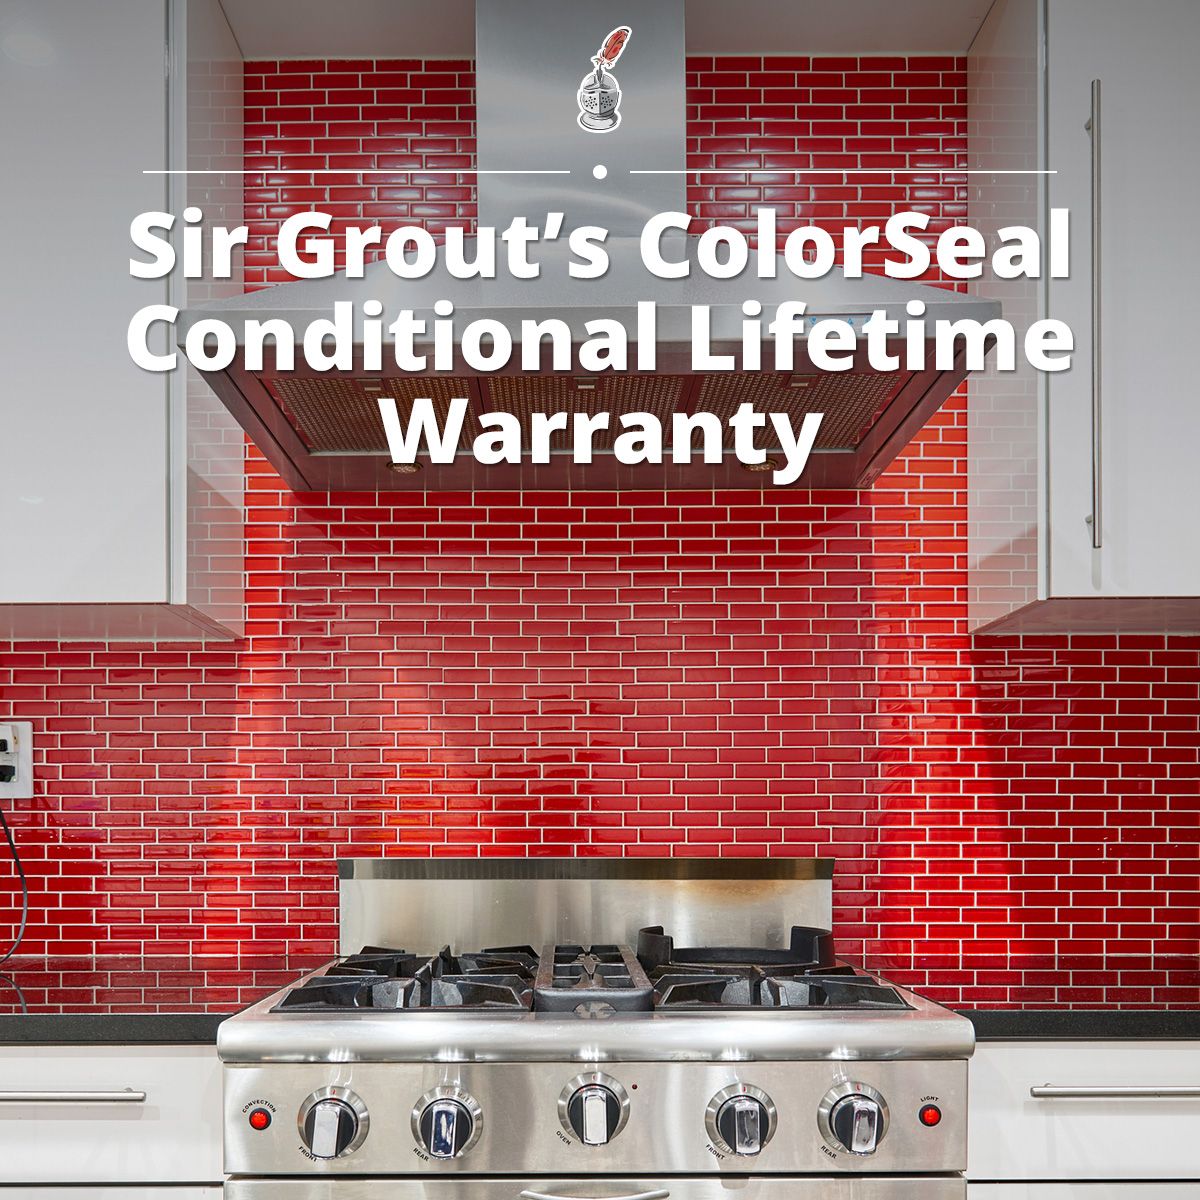 Sir Grout's ColorSeal Conditional Lifetime Warranty